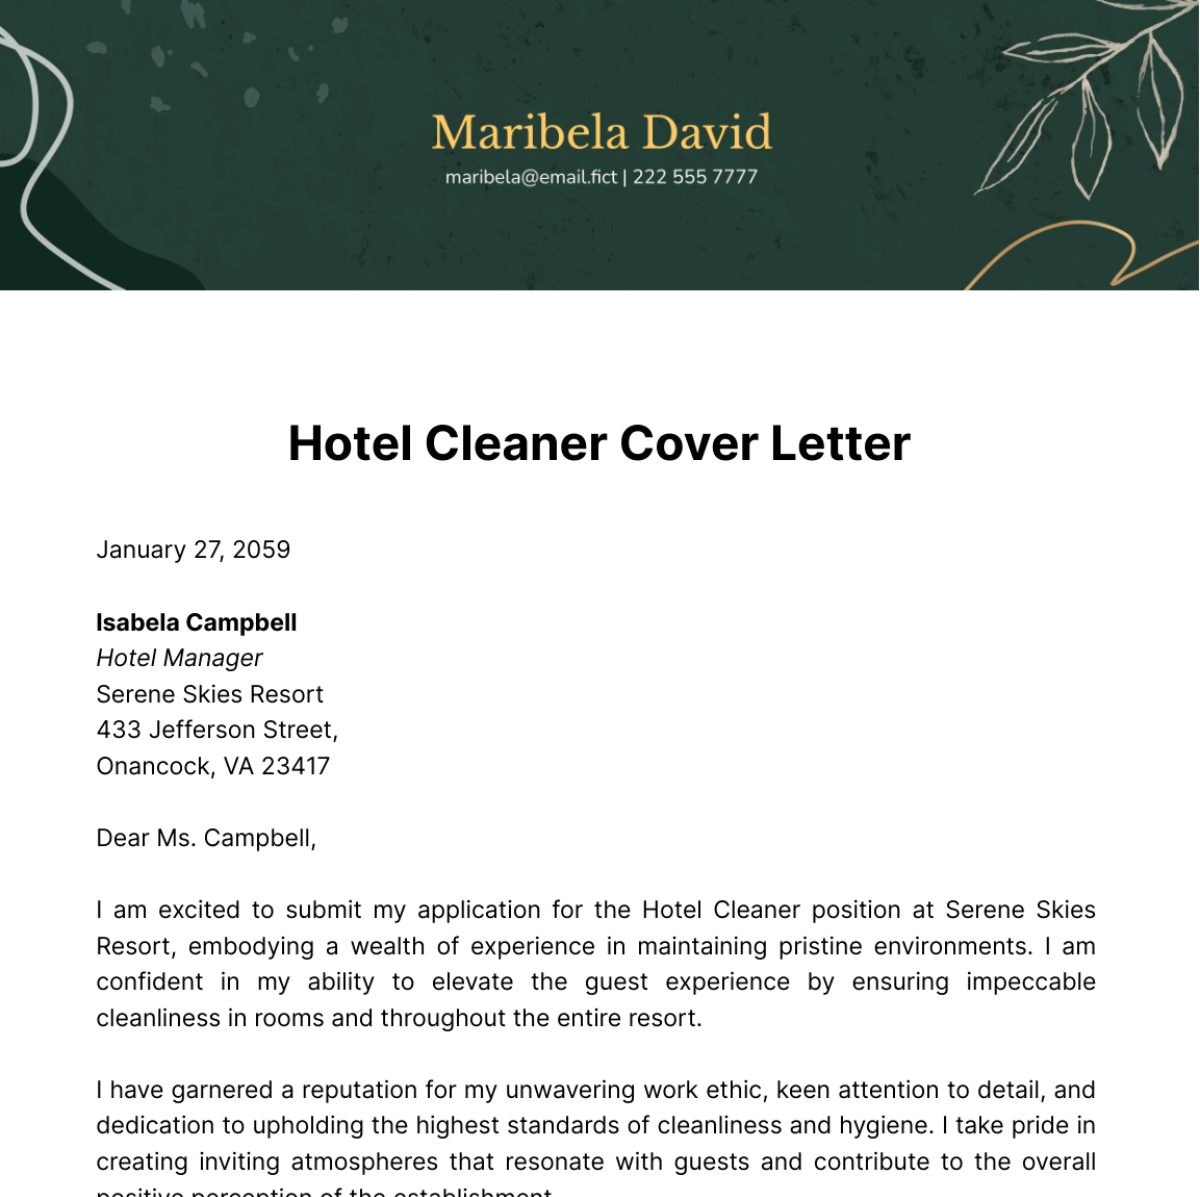 Hotel Cleaner Cover Letter Template